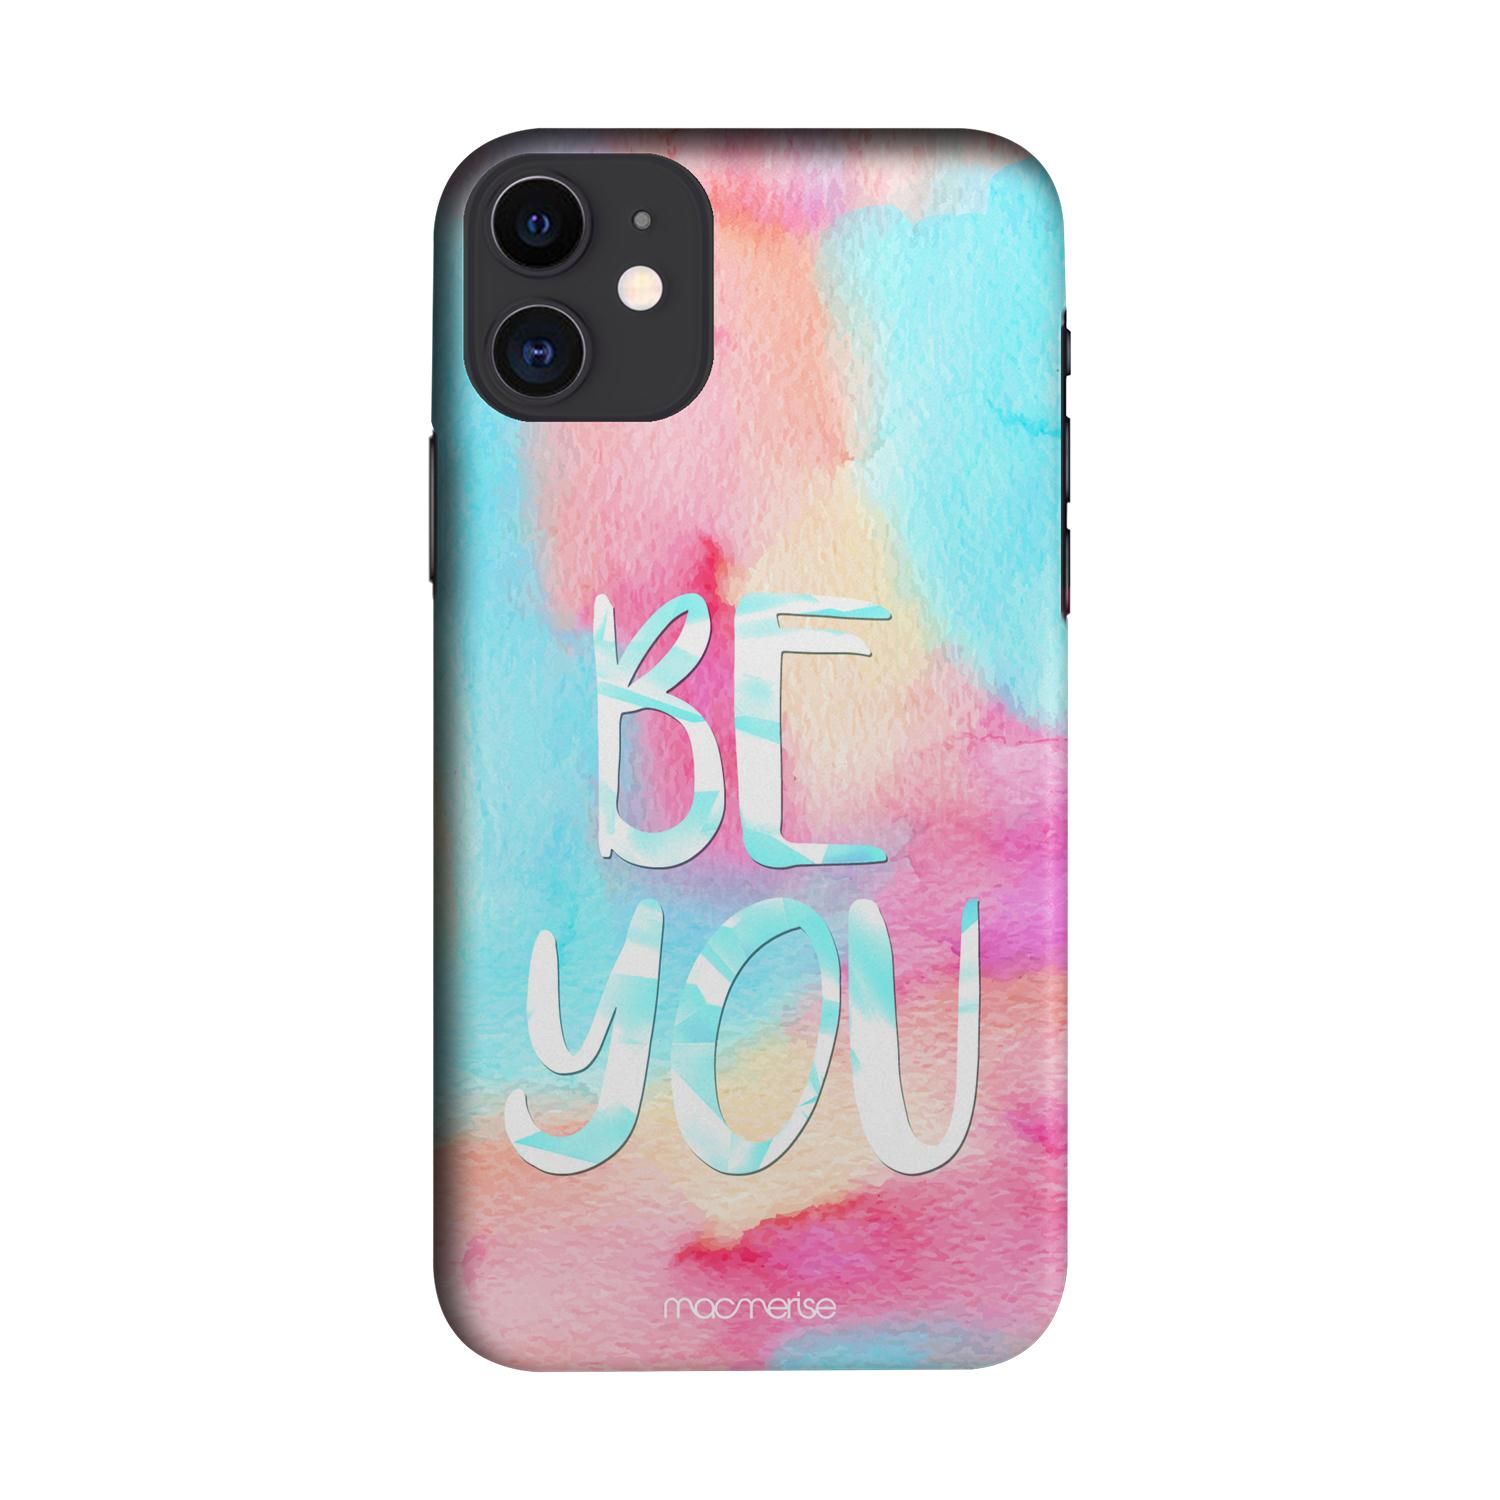 Buy Be You - Sleek Phone Case for iPhone 11 Online